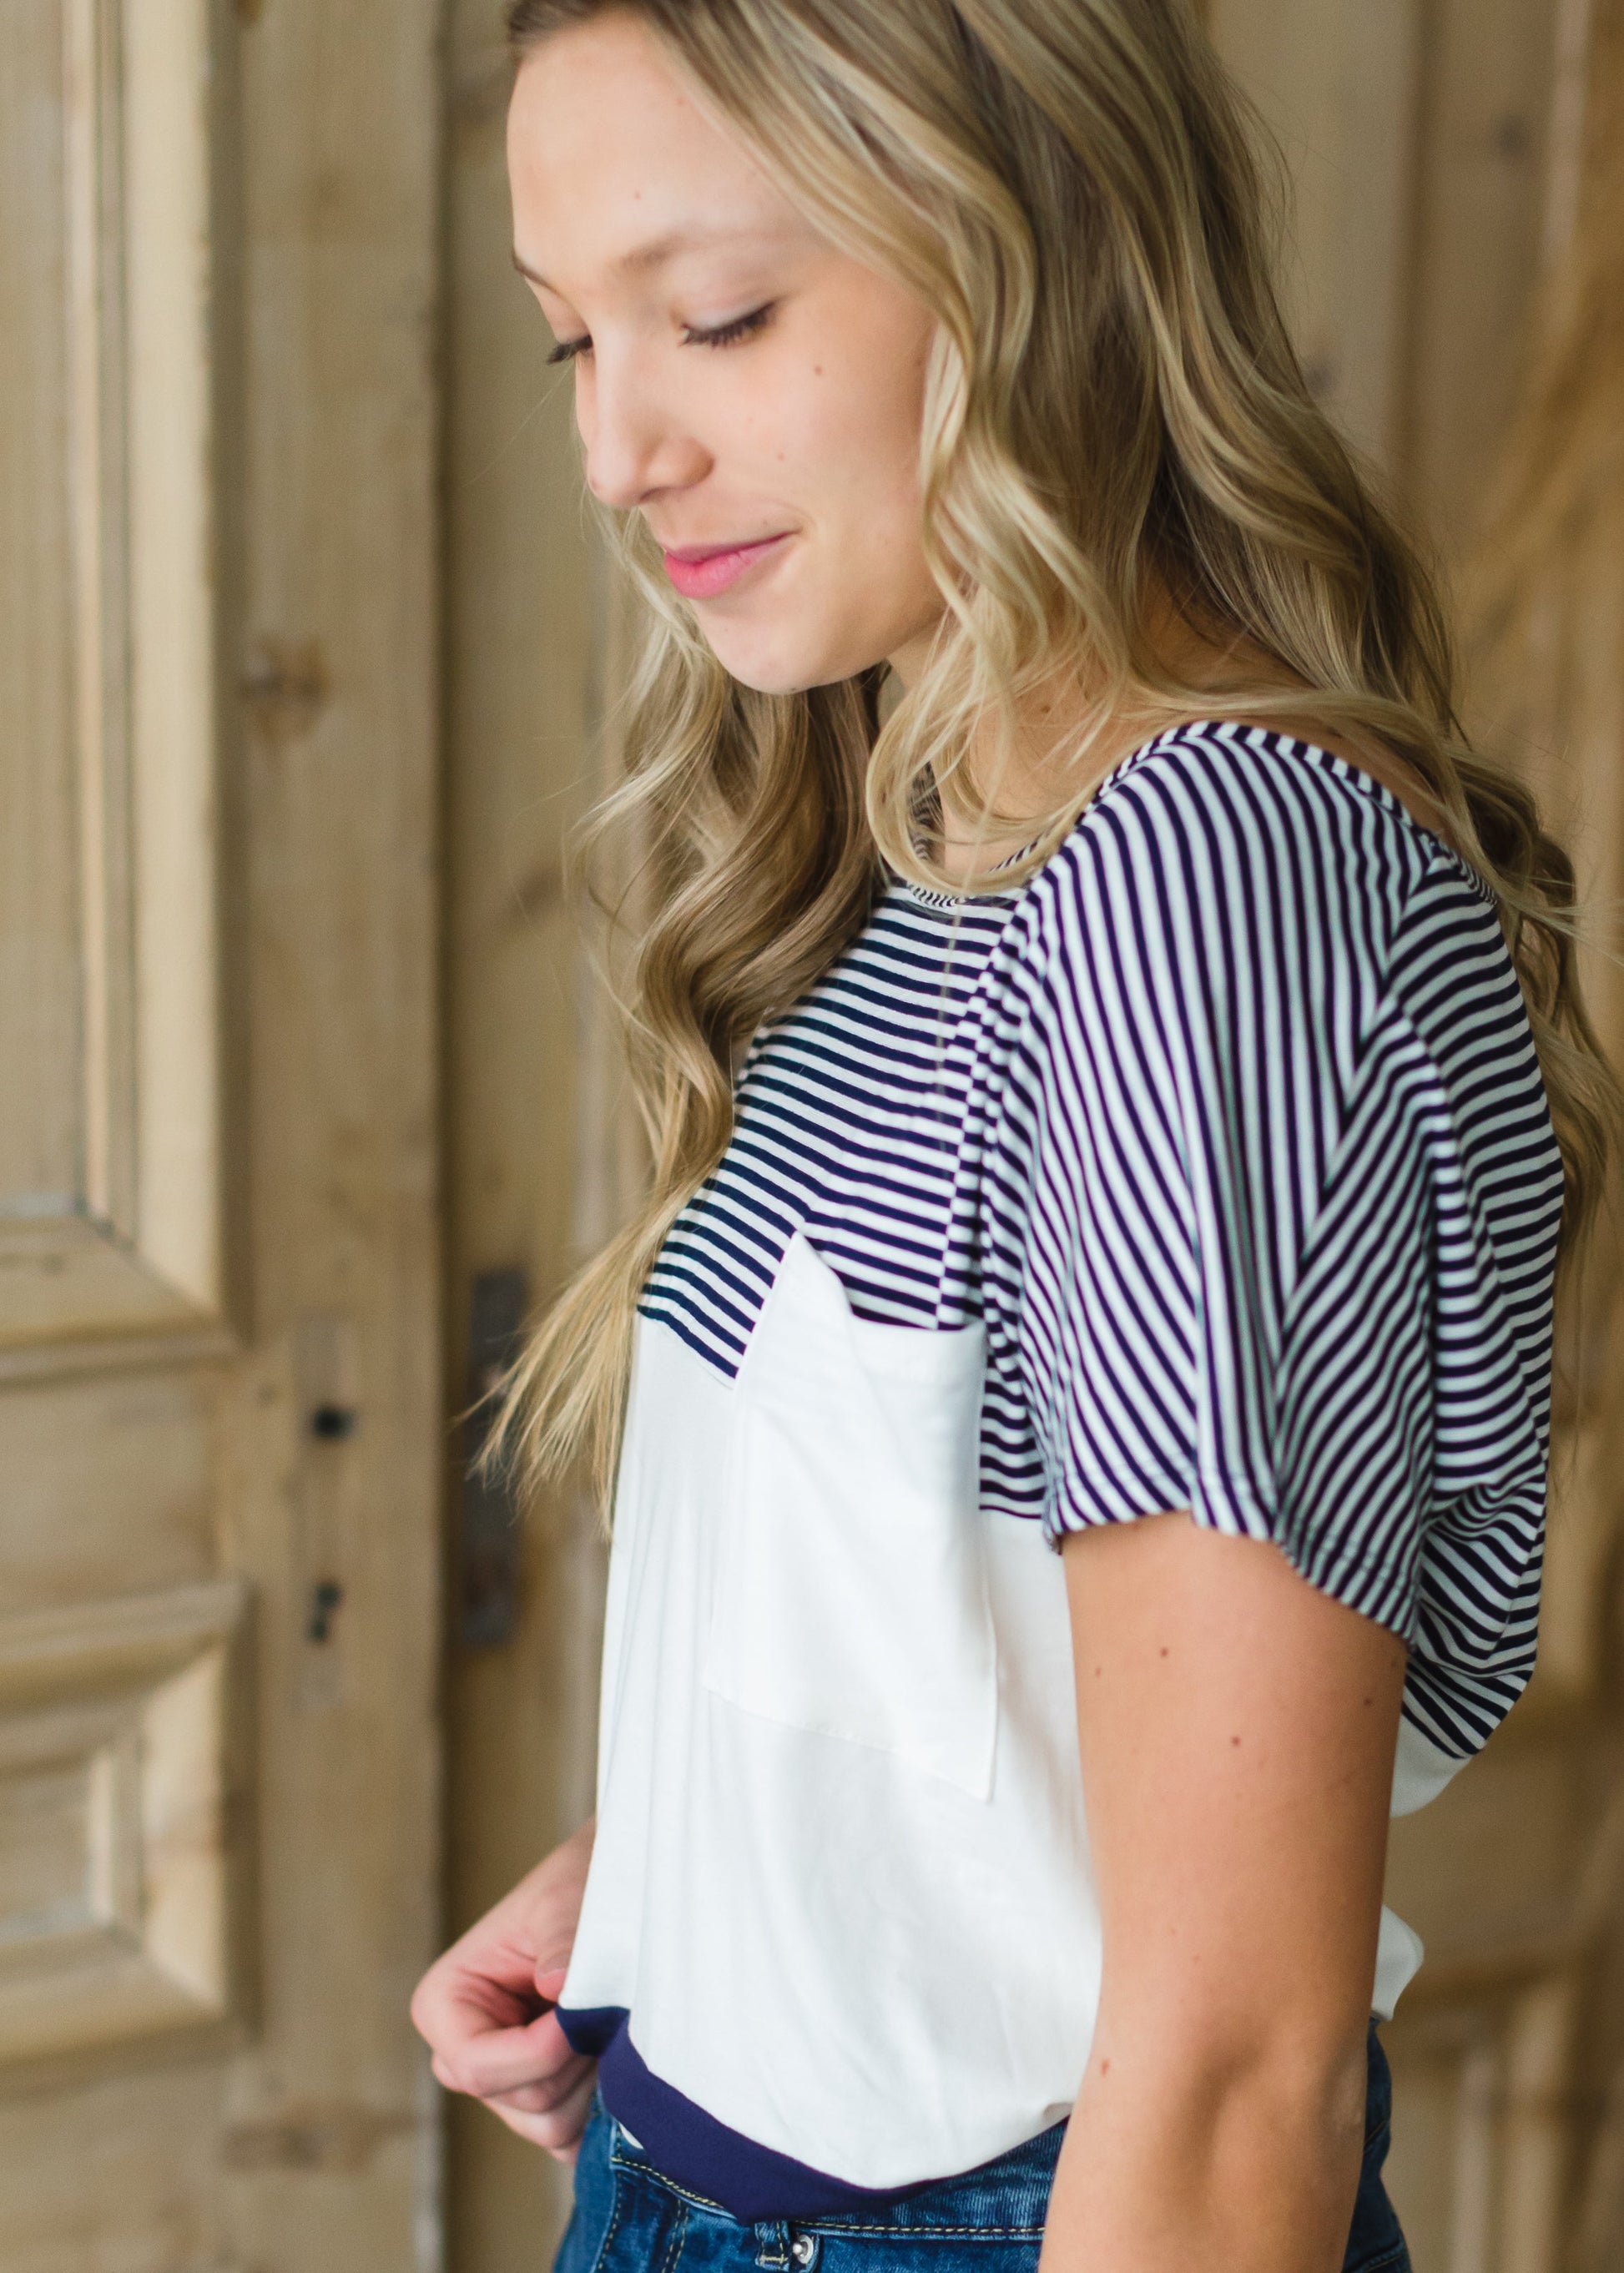 Navy Pin Striped Color Block Top - FINAL SALE Tops